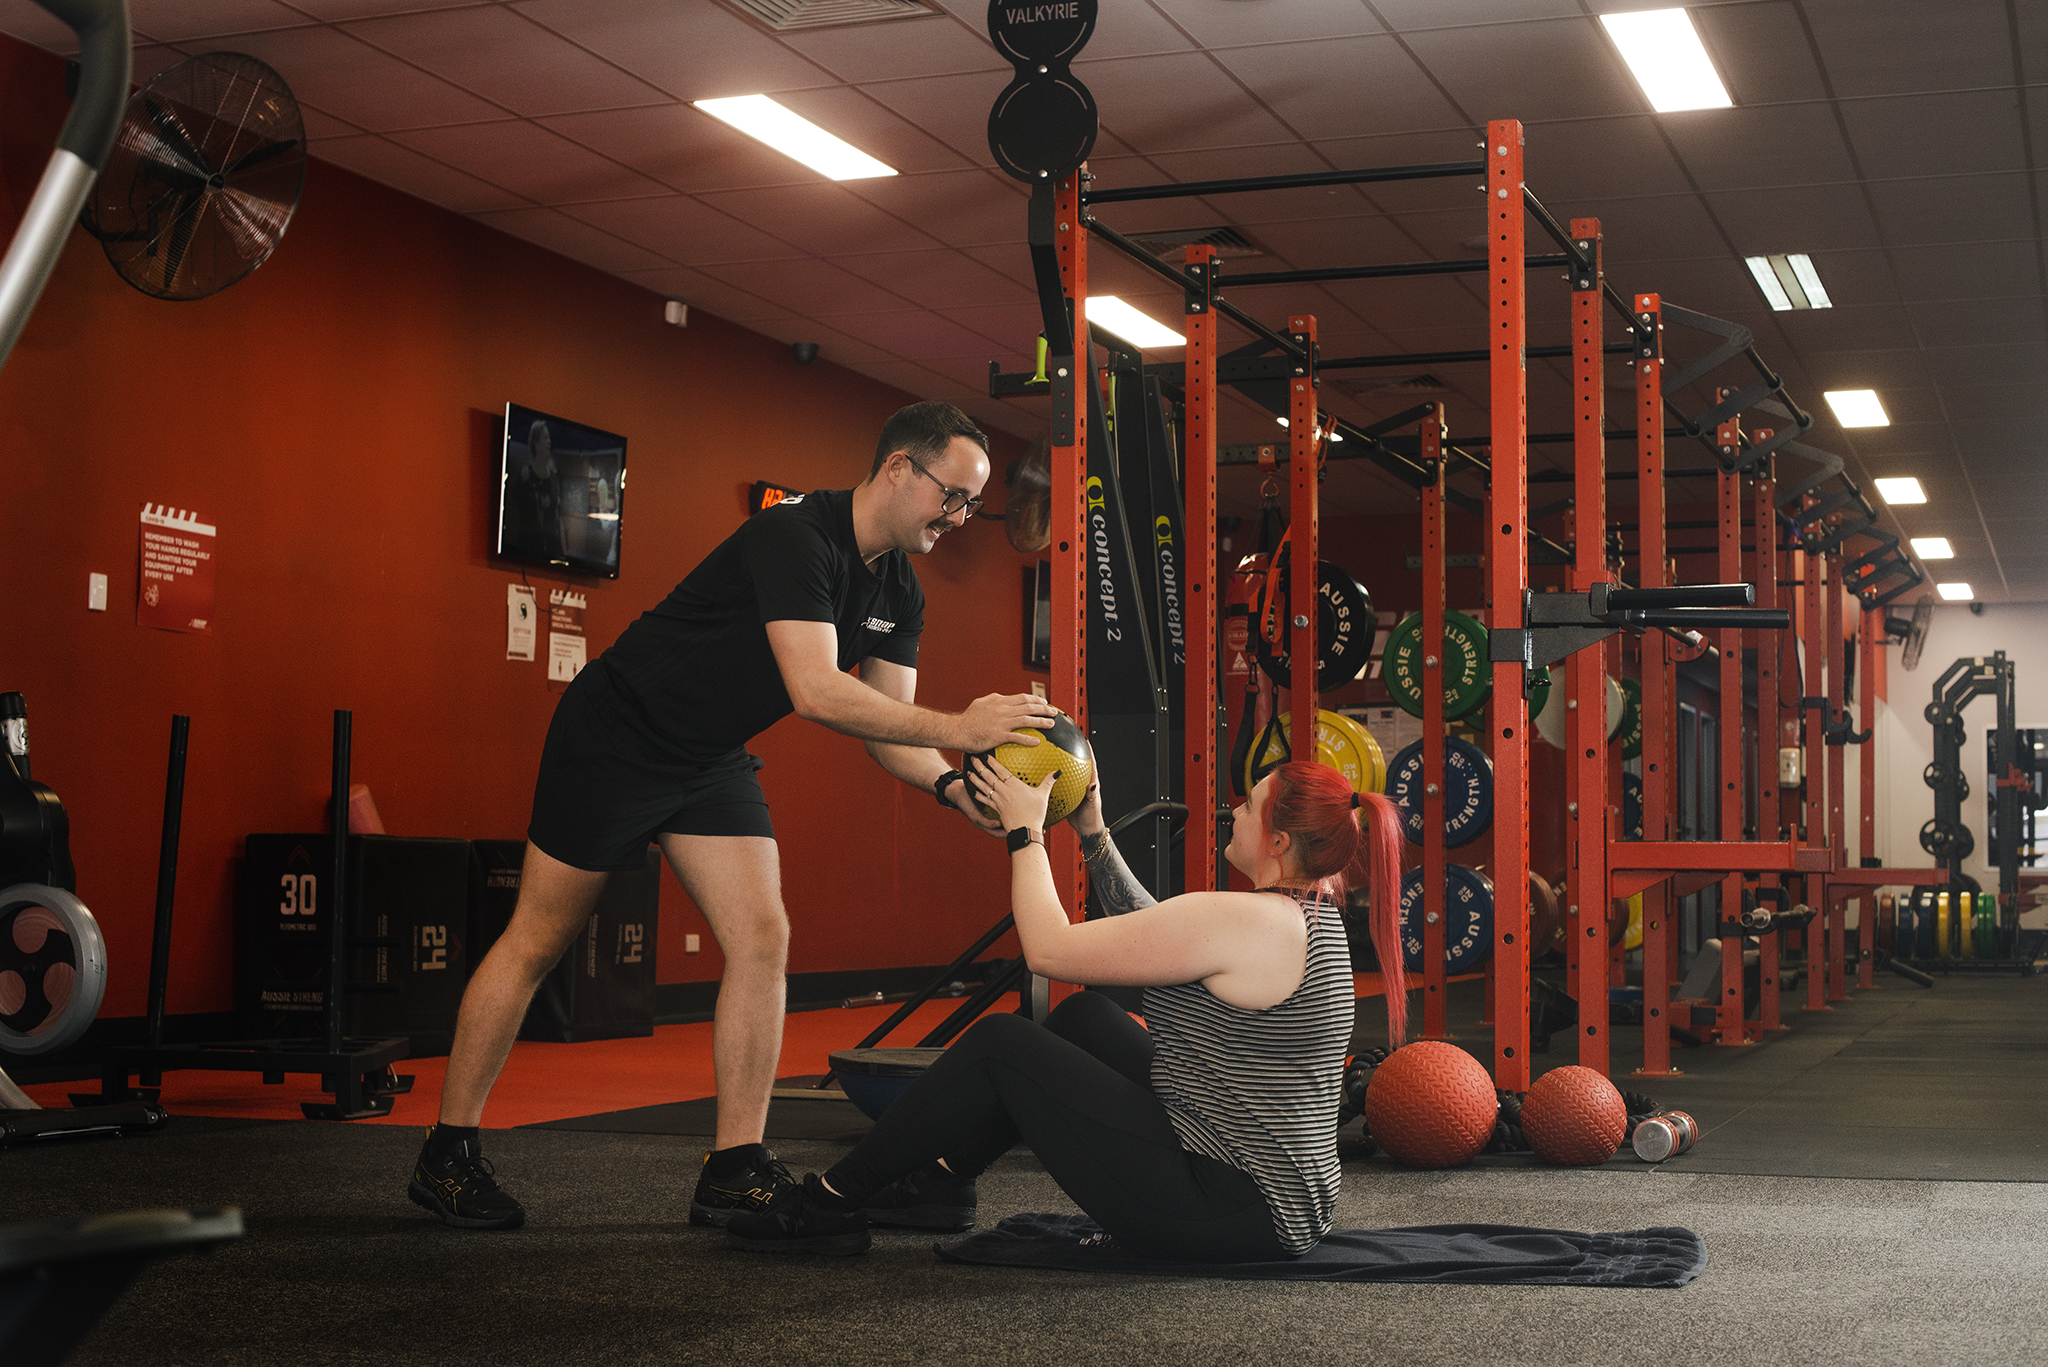 A personal trainer passes a weighted ball from a standing position down to a seated fitness client. They are in a red gym.